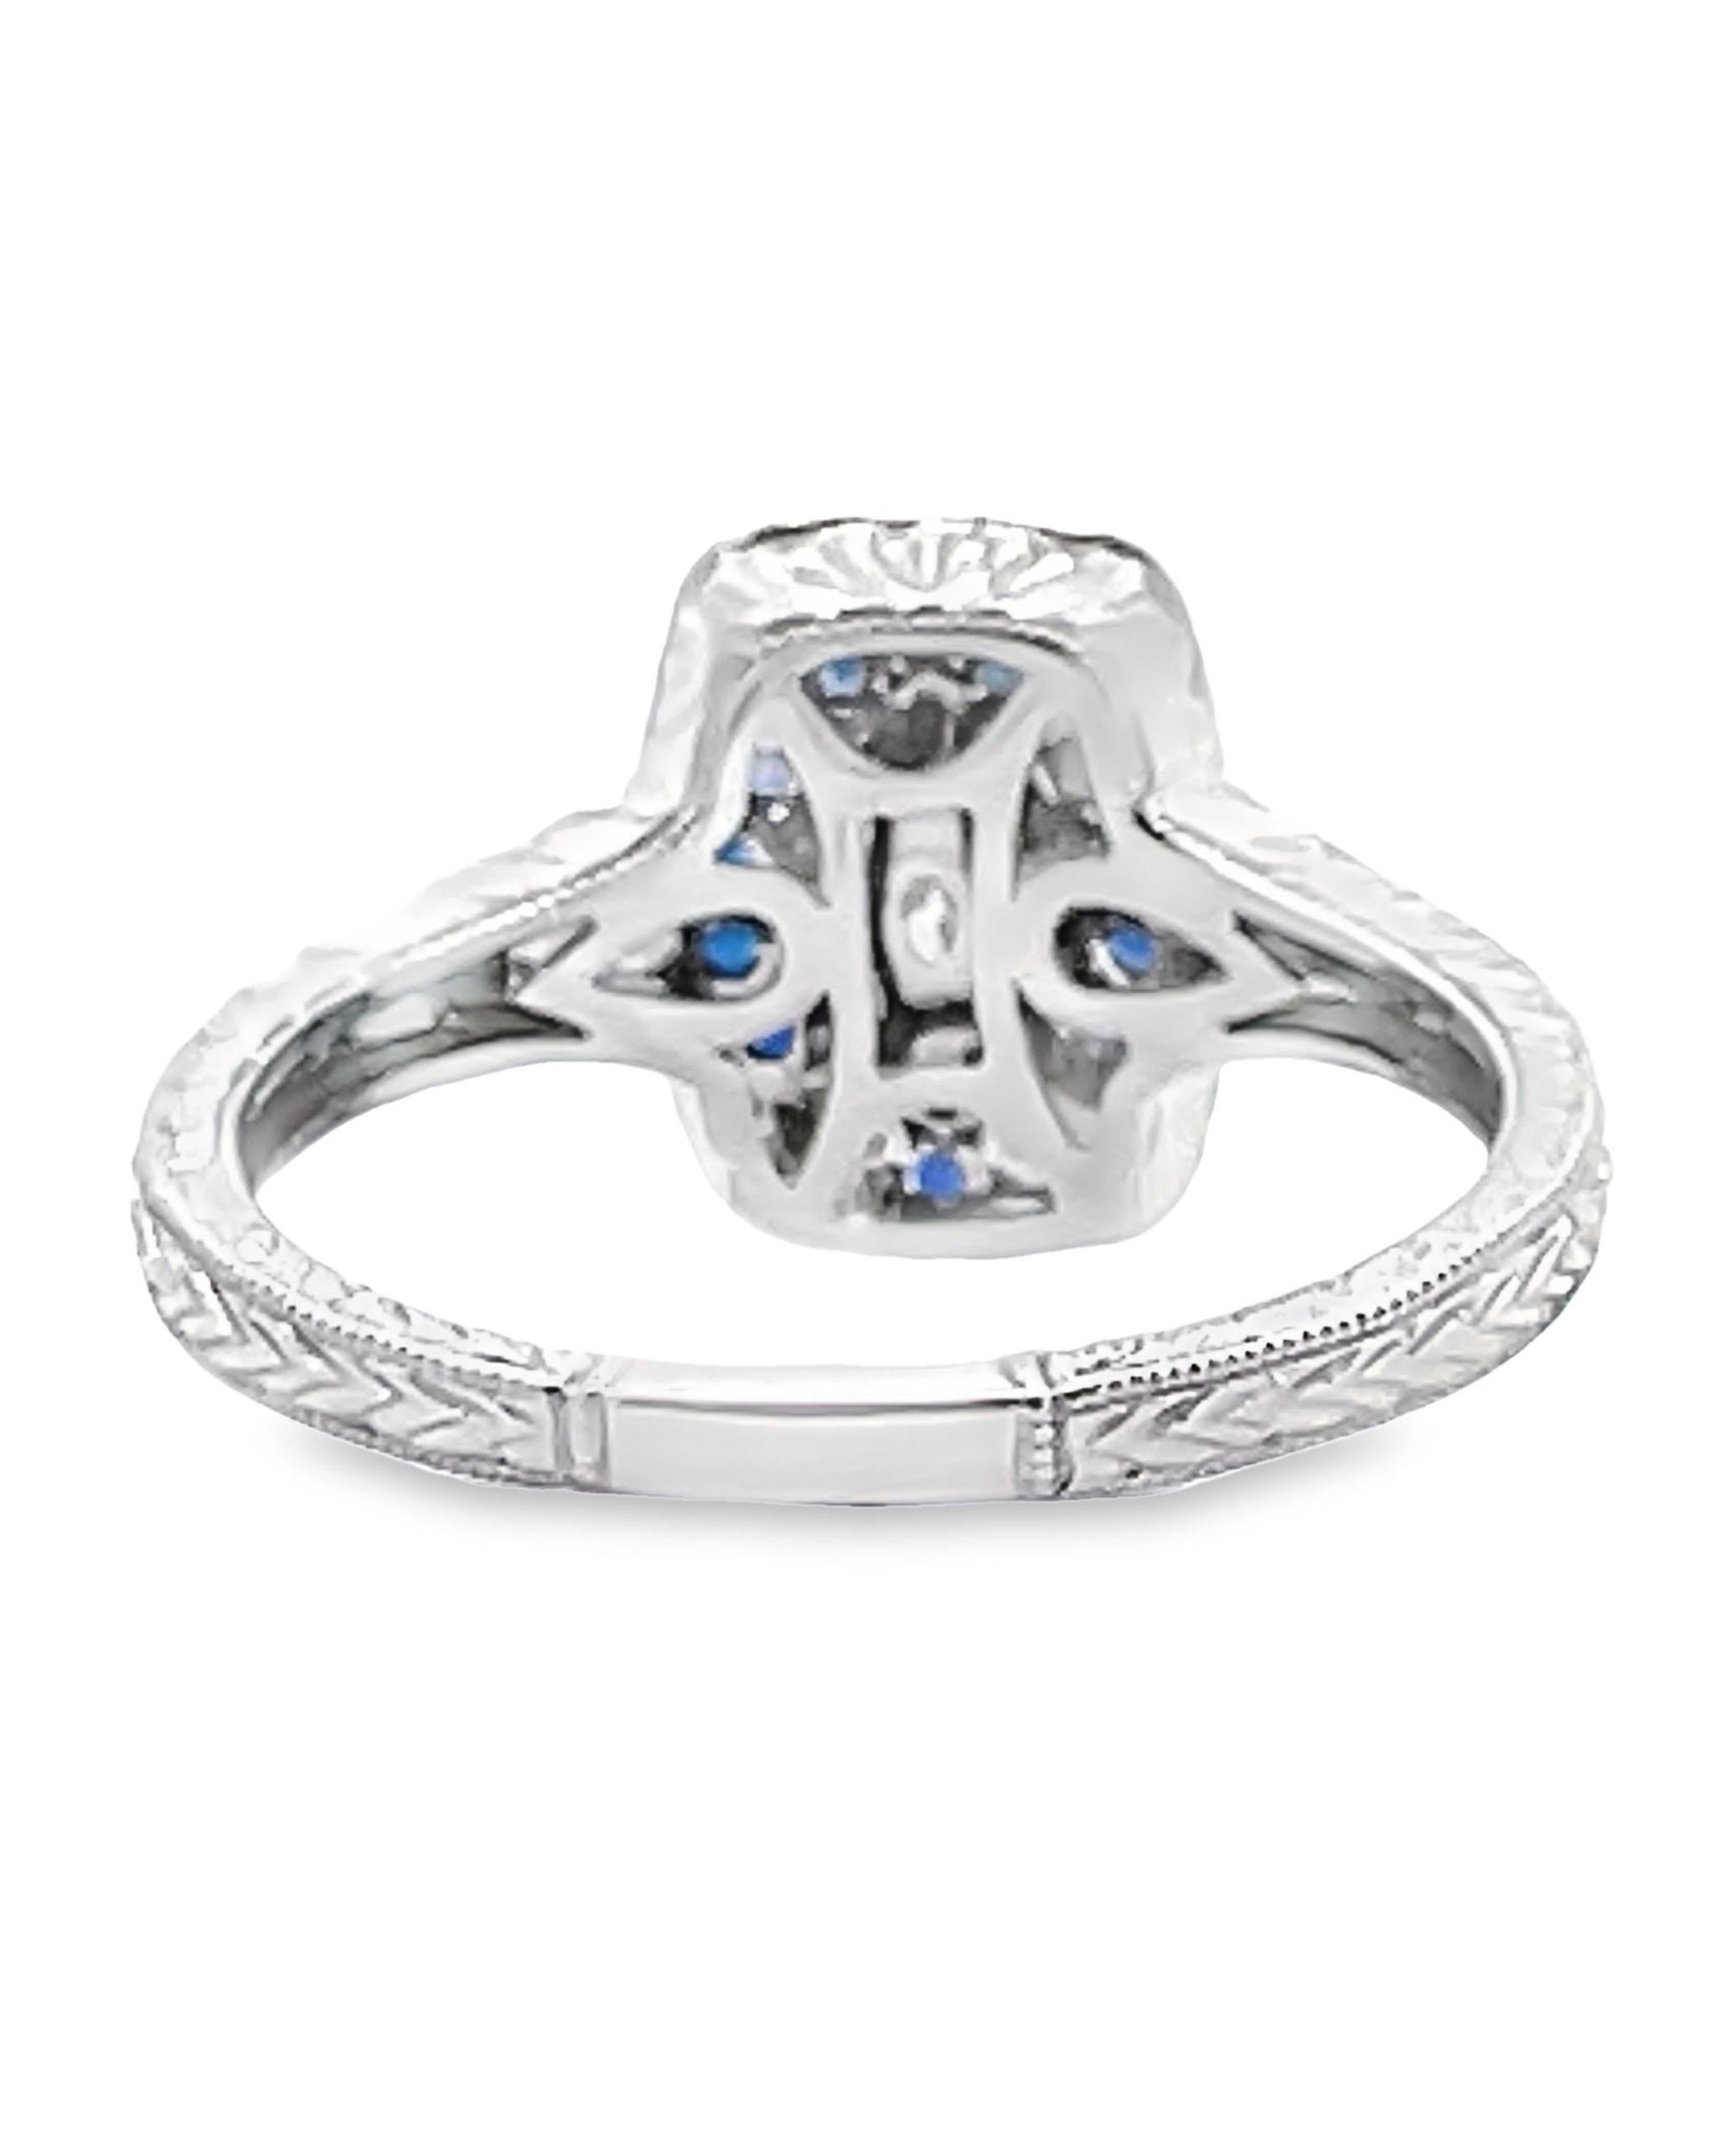 Art Deco 14K White Gold Antique Inspired Ring with Diamond and Sapphire For Sale